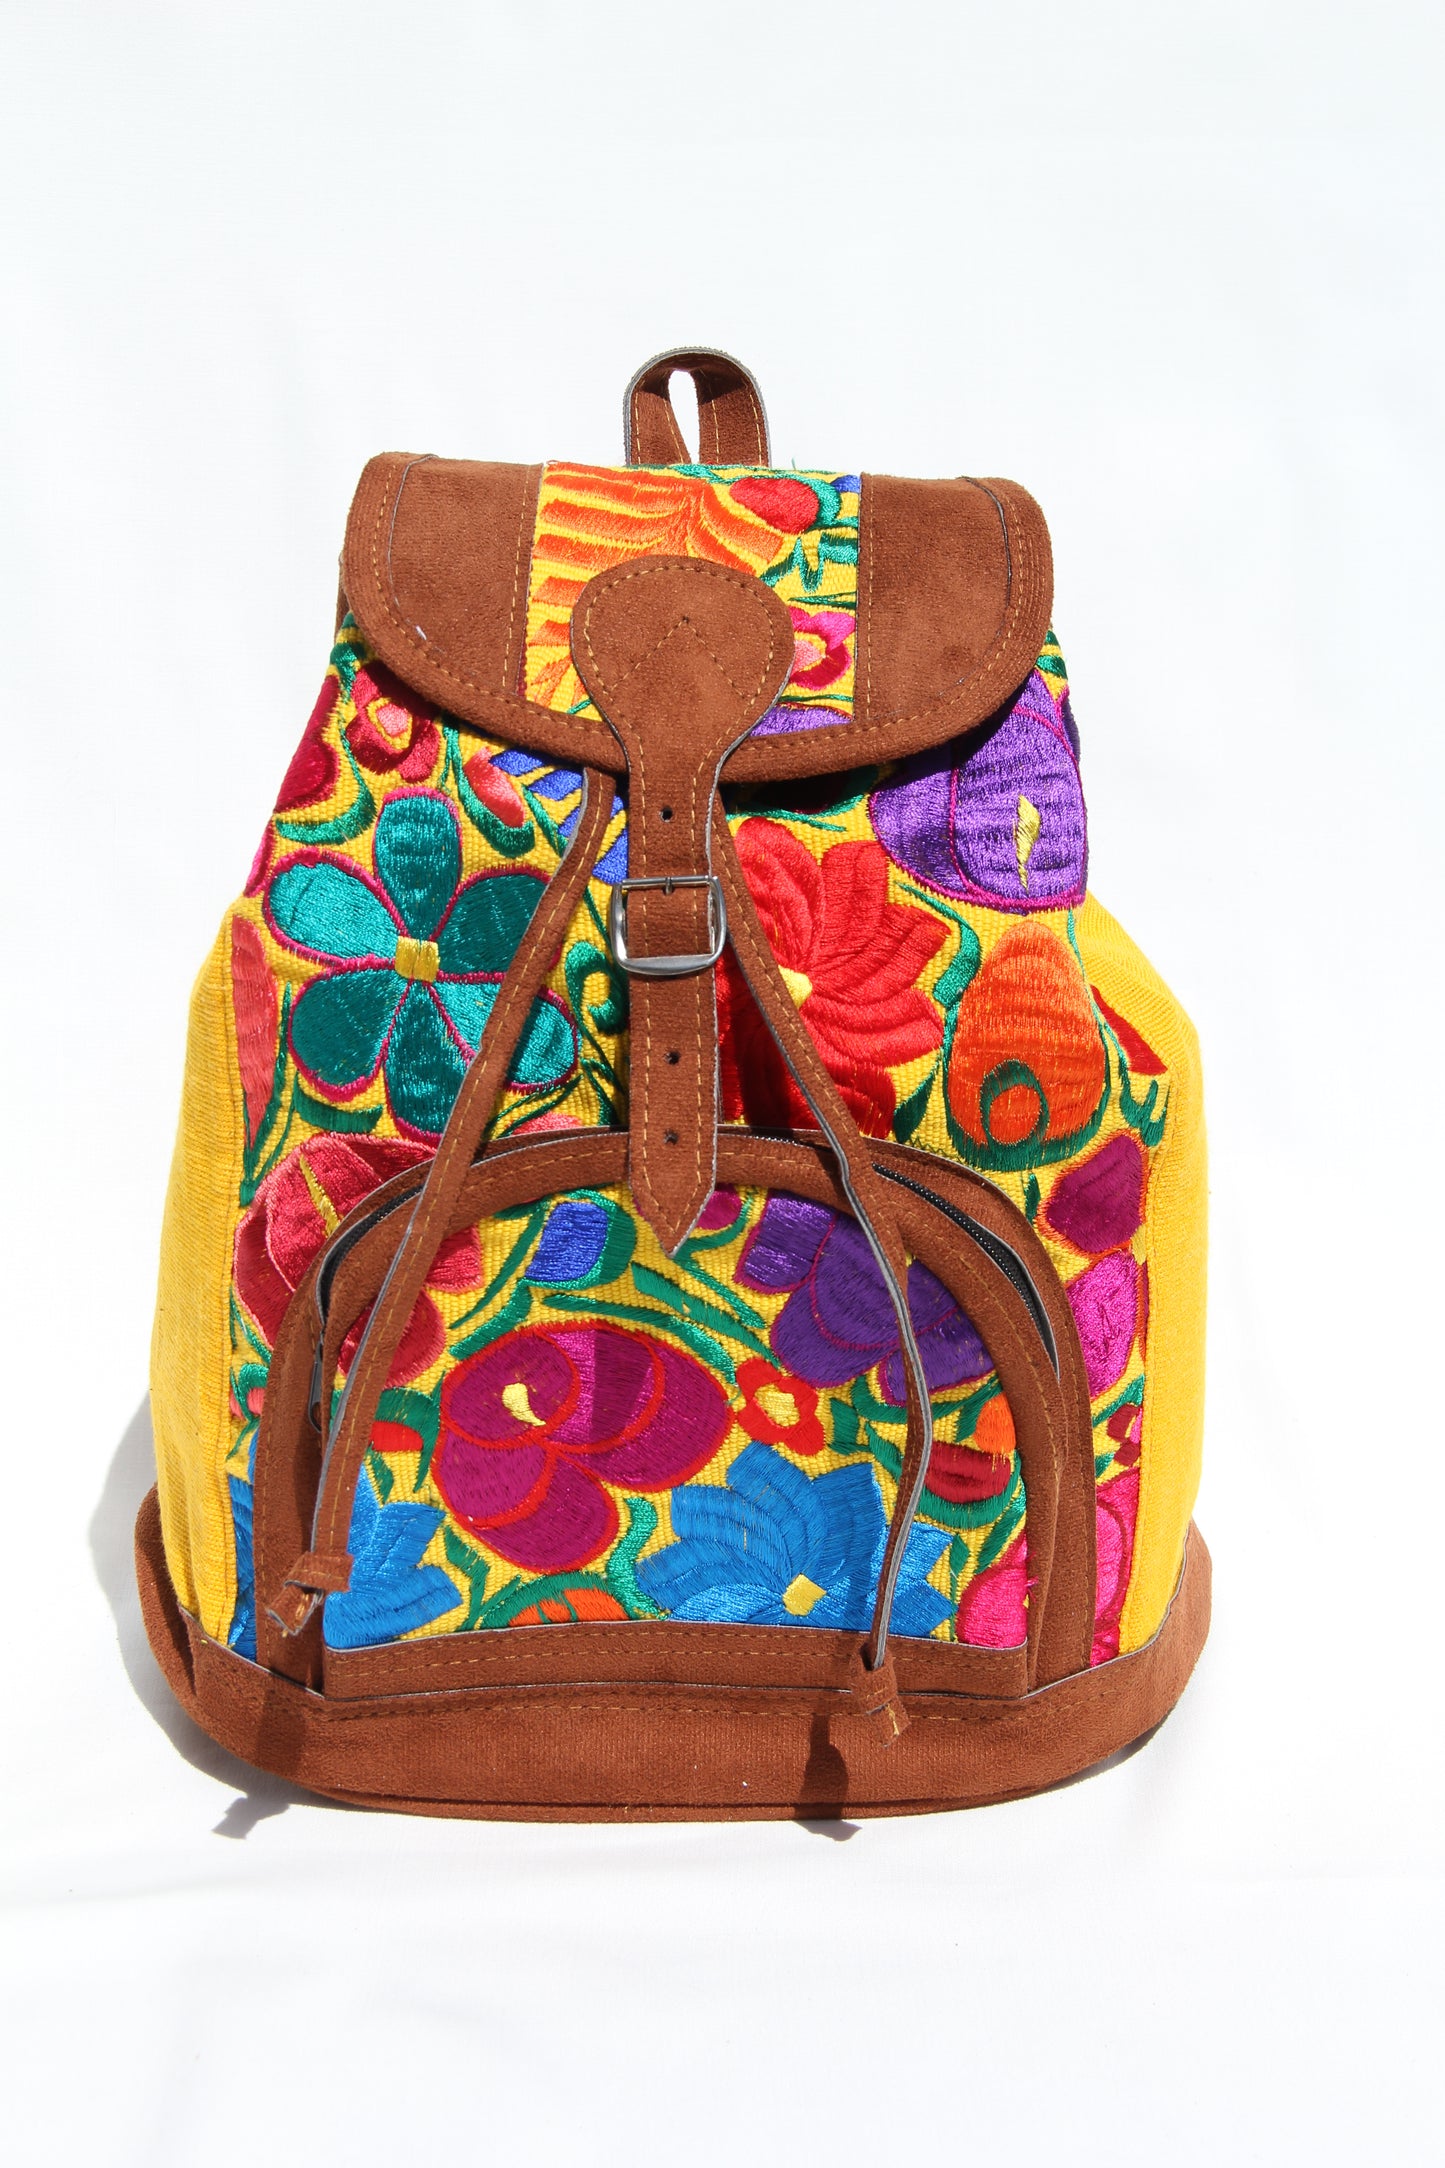 colorful huipil floral embroidery backpack with yellow woven fabric and faux suede contrast with adjustable straps and front buckle closure with front zipper pocket the prefect travel, hiking or beach bag unique bag great for back to school take this bag on your next destination boho bag and hippie style bag a great standout accessories made in Guatemala